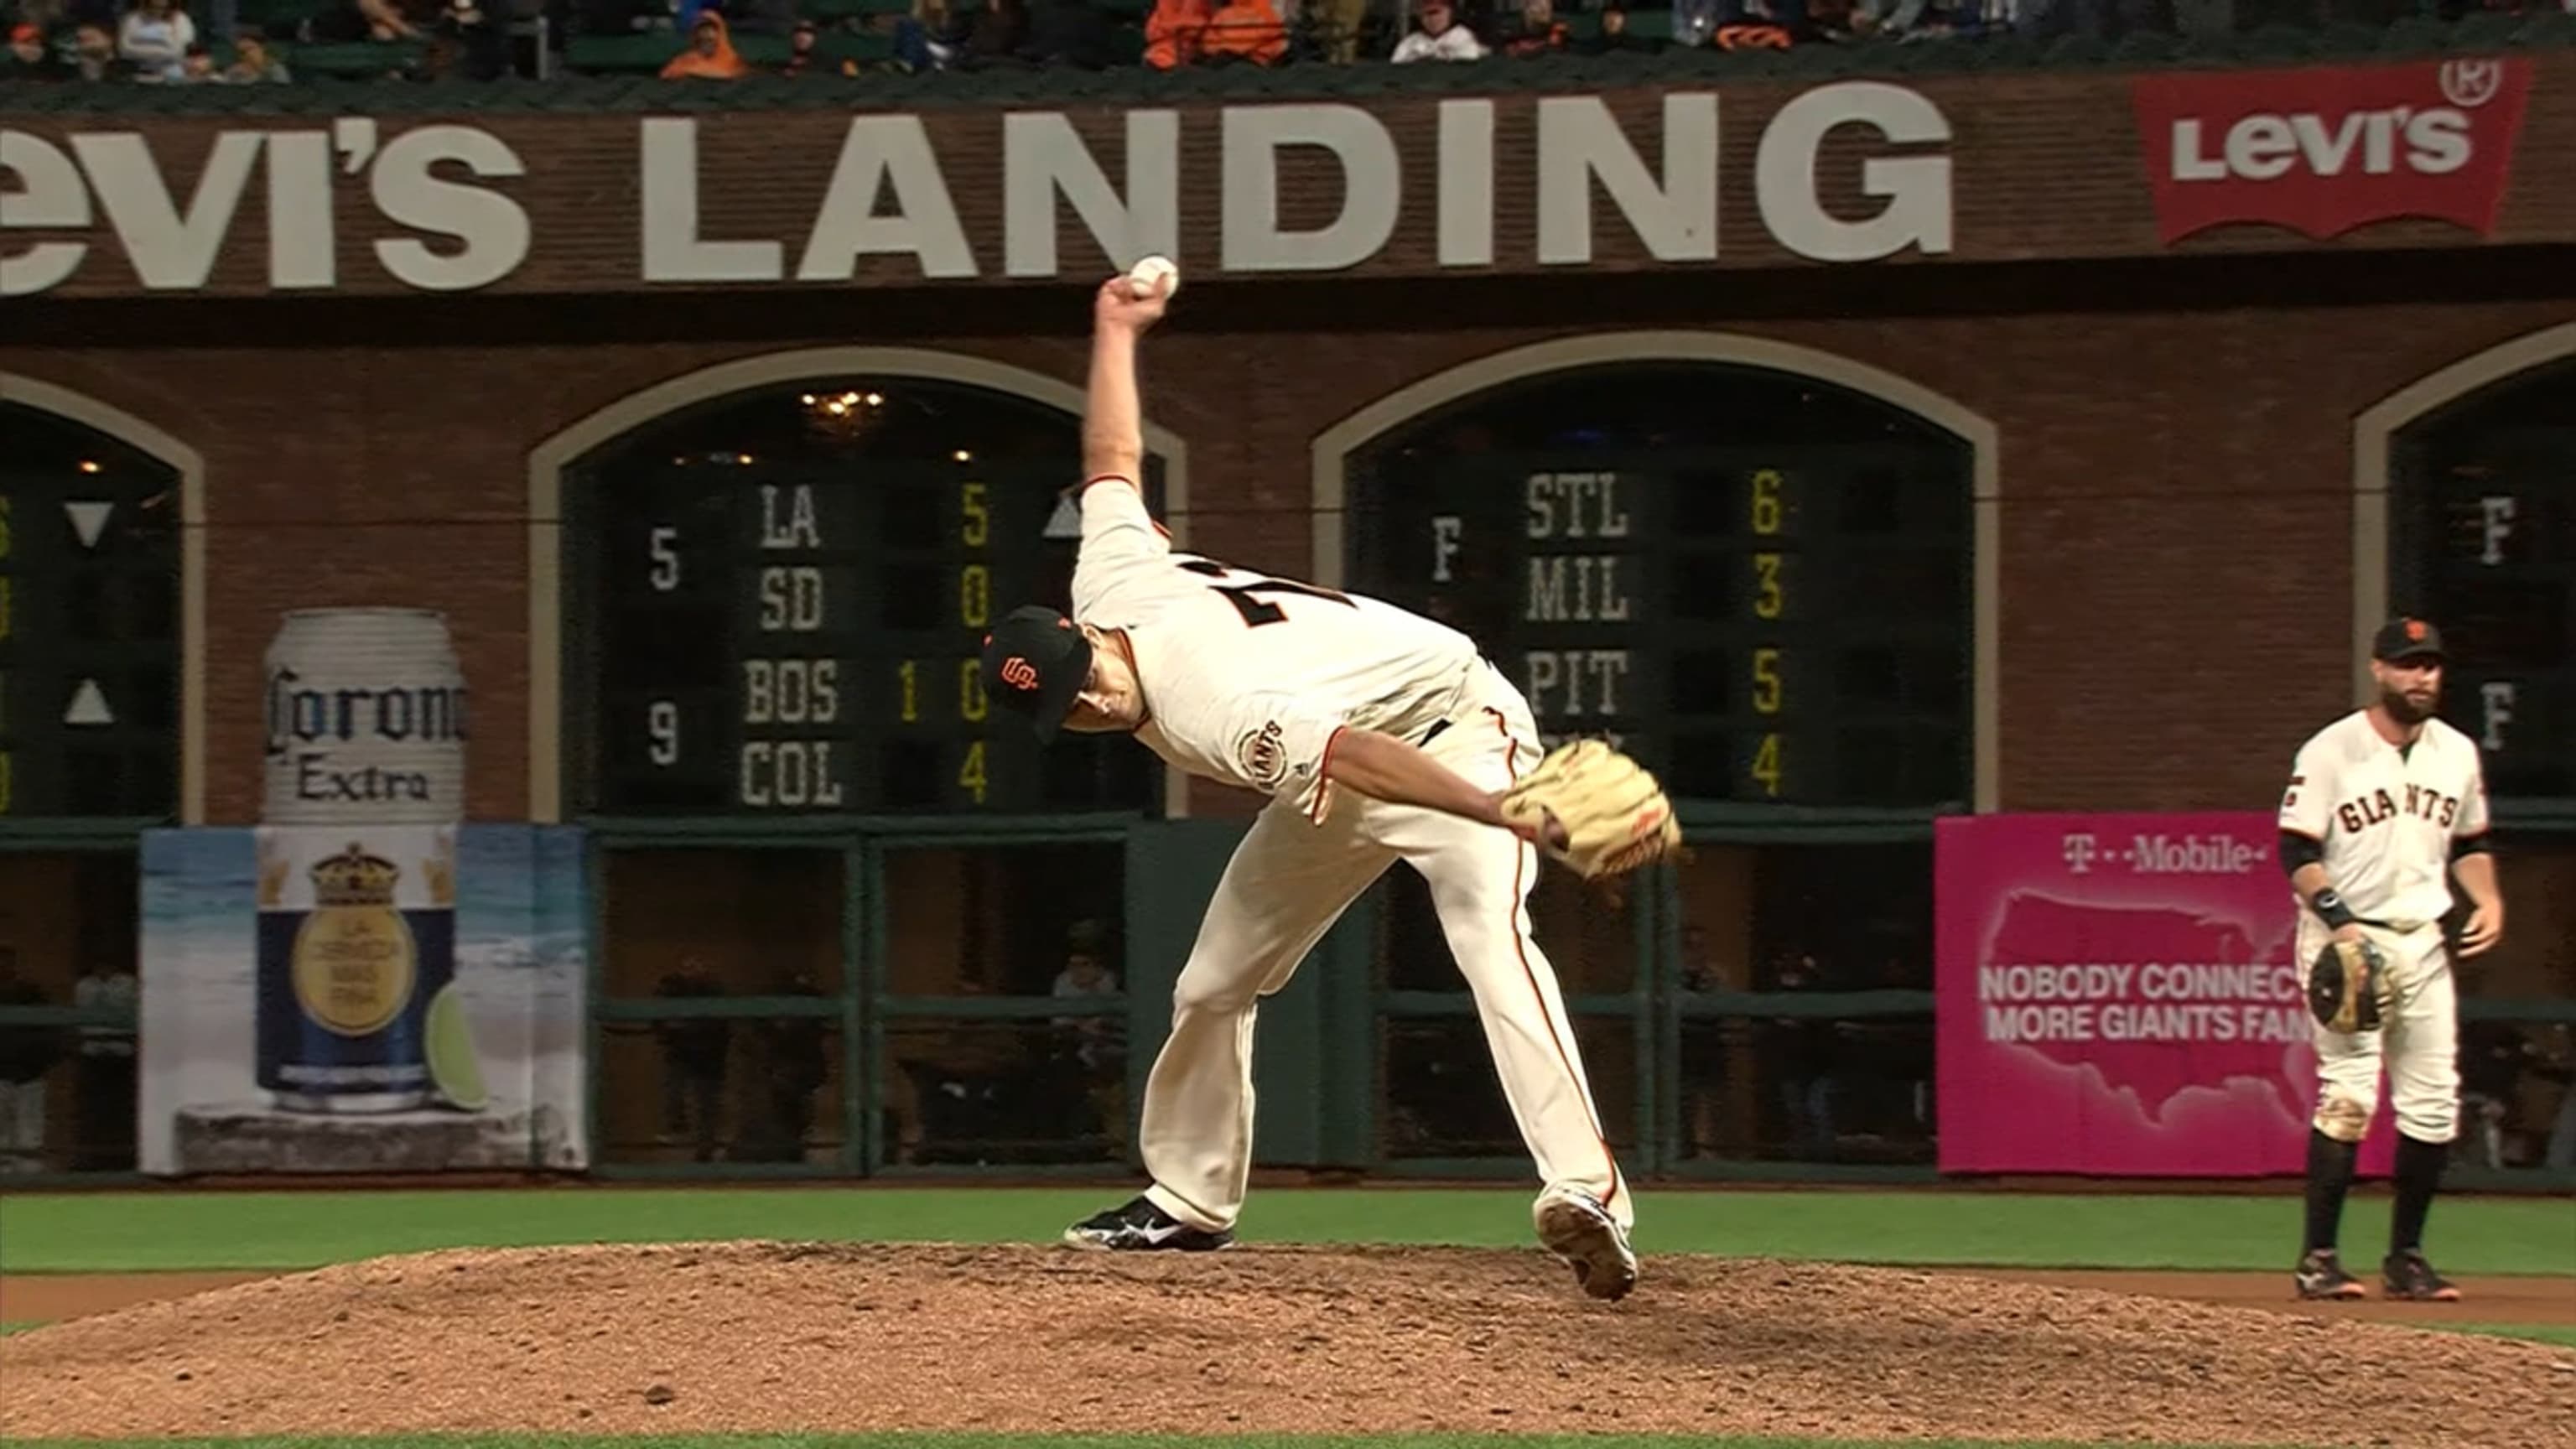 Giants rookie pitcher has wild delivery